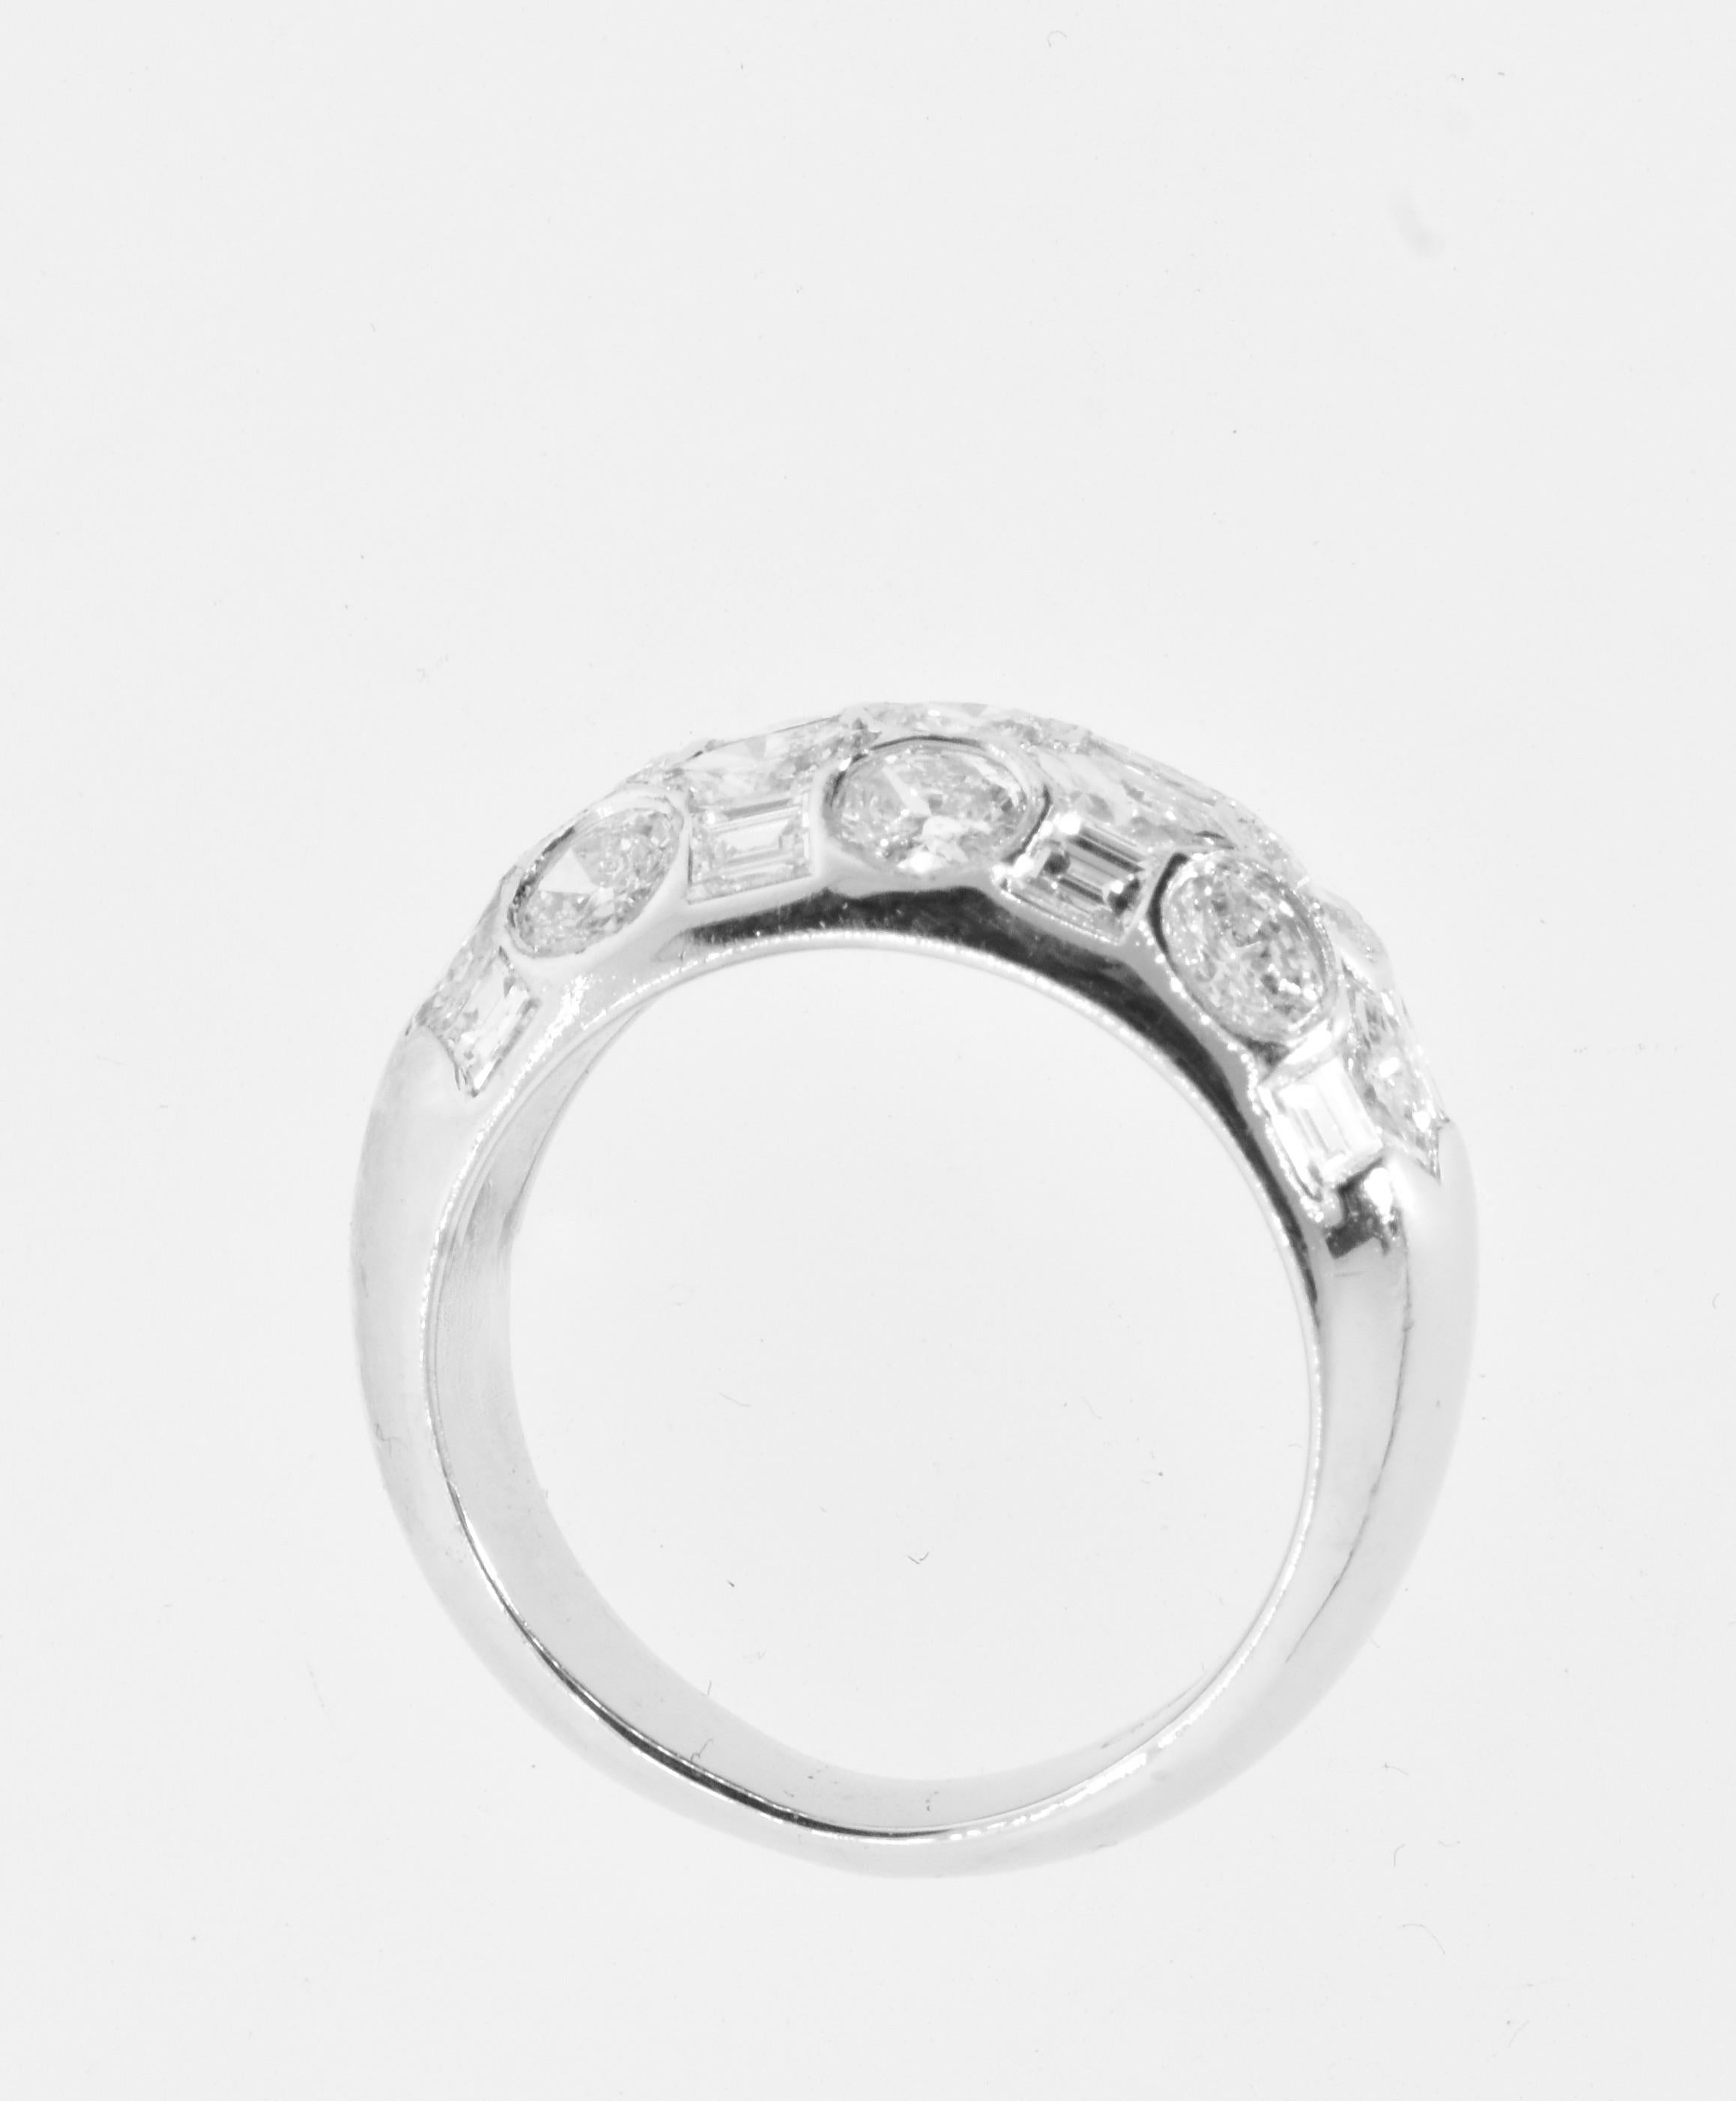 Fancy Cut Diamond with 2.50 cts. of fine white stones set in 18K White Gold Ring 5